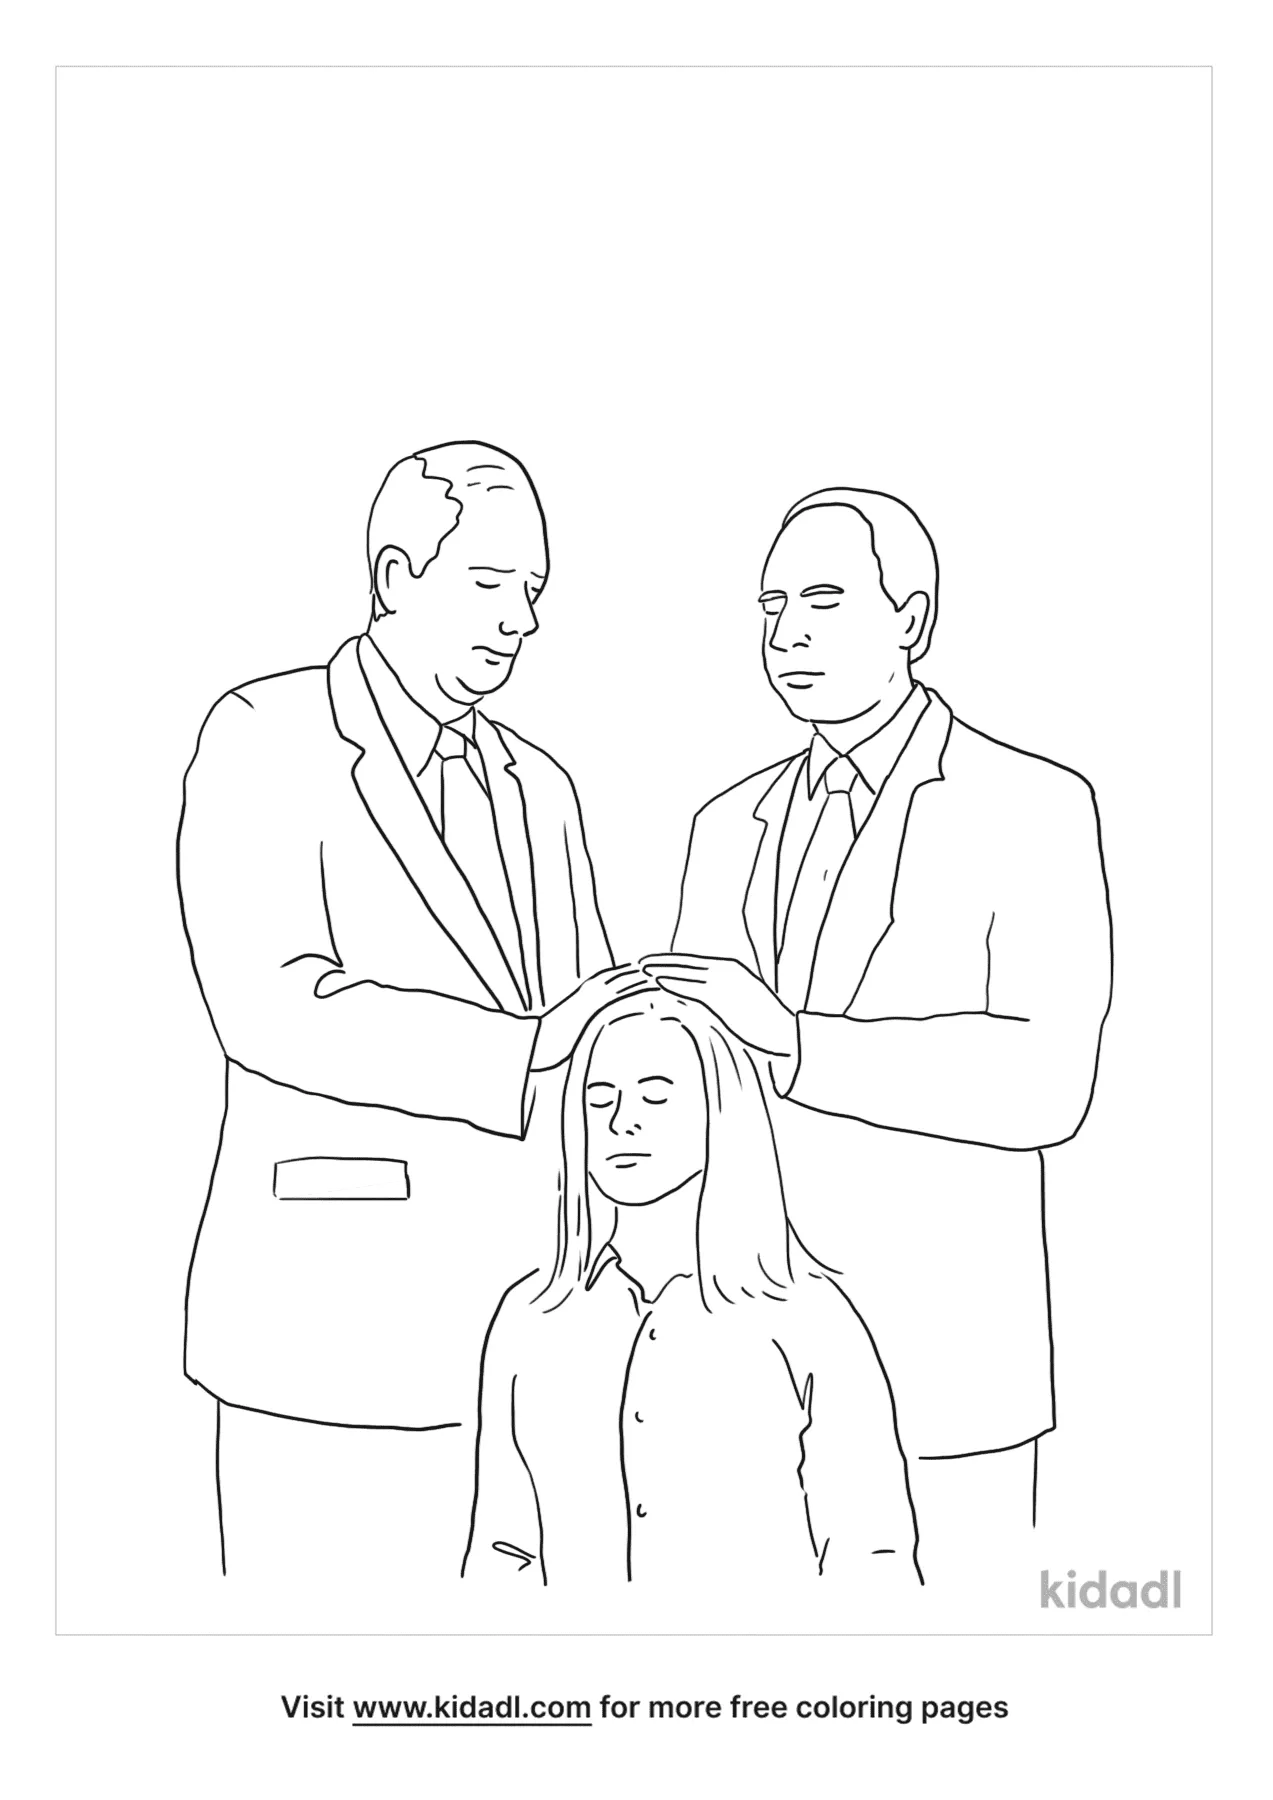 Priesthood Blessings Coloring Page